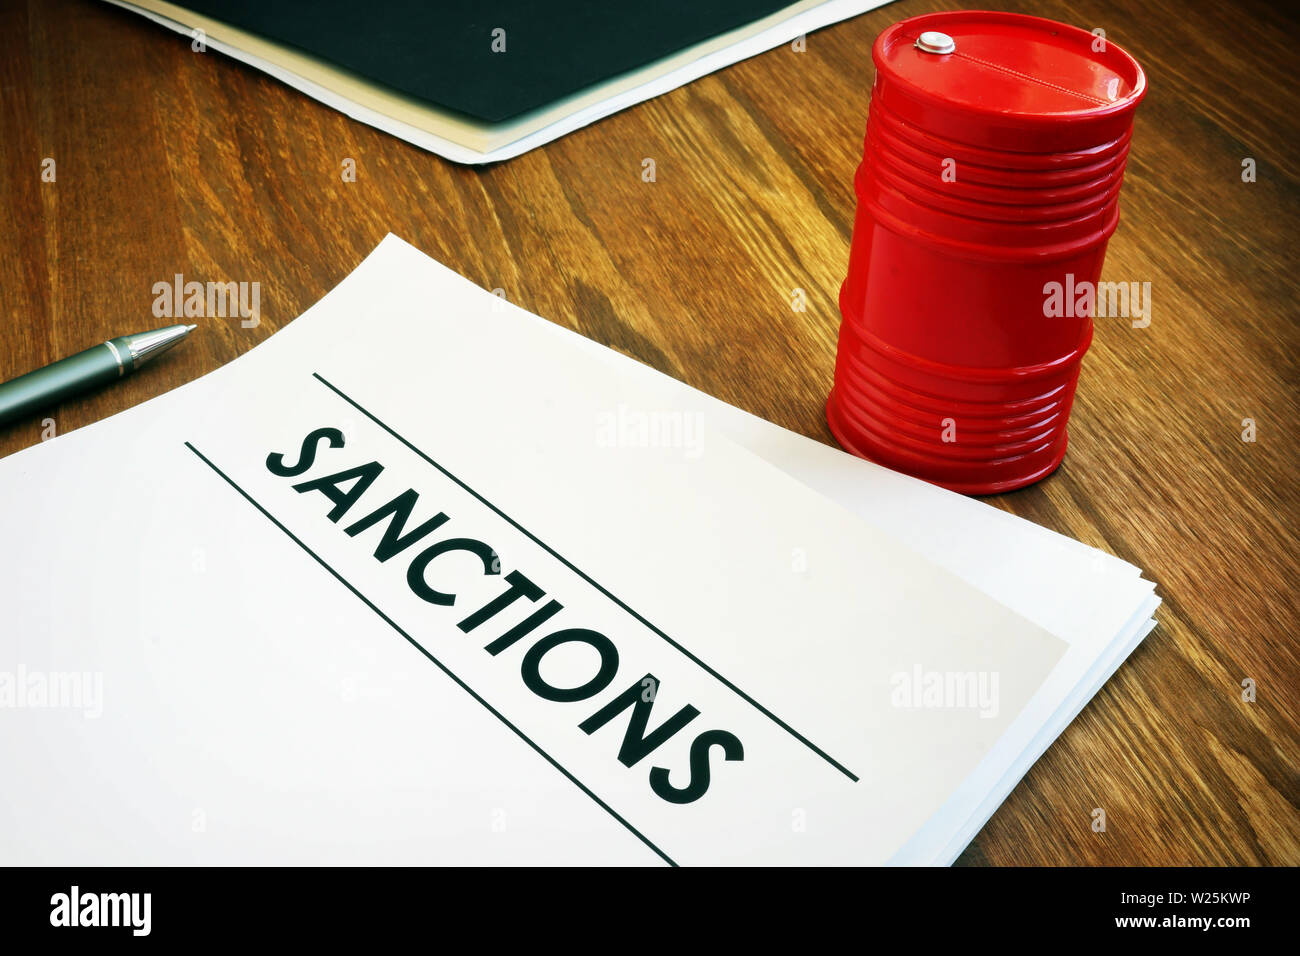 Sanctions list with model of oil barrel. Stock Photo